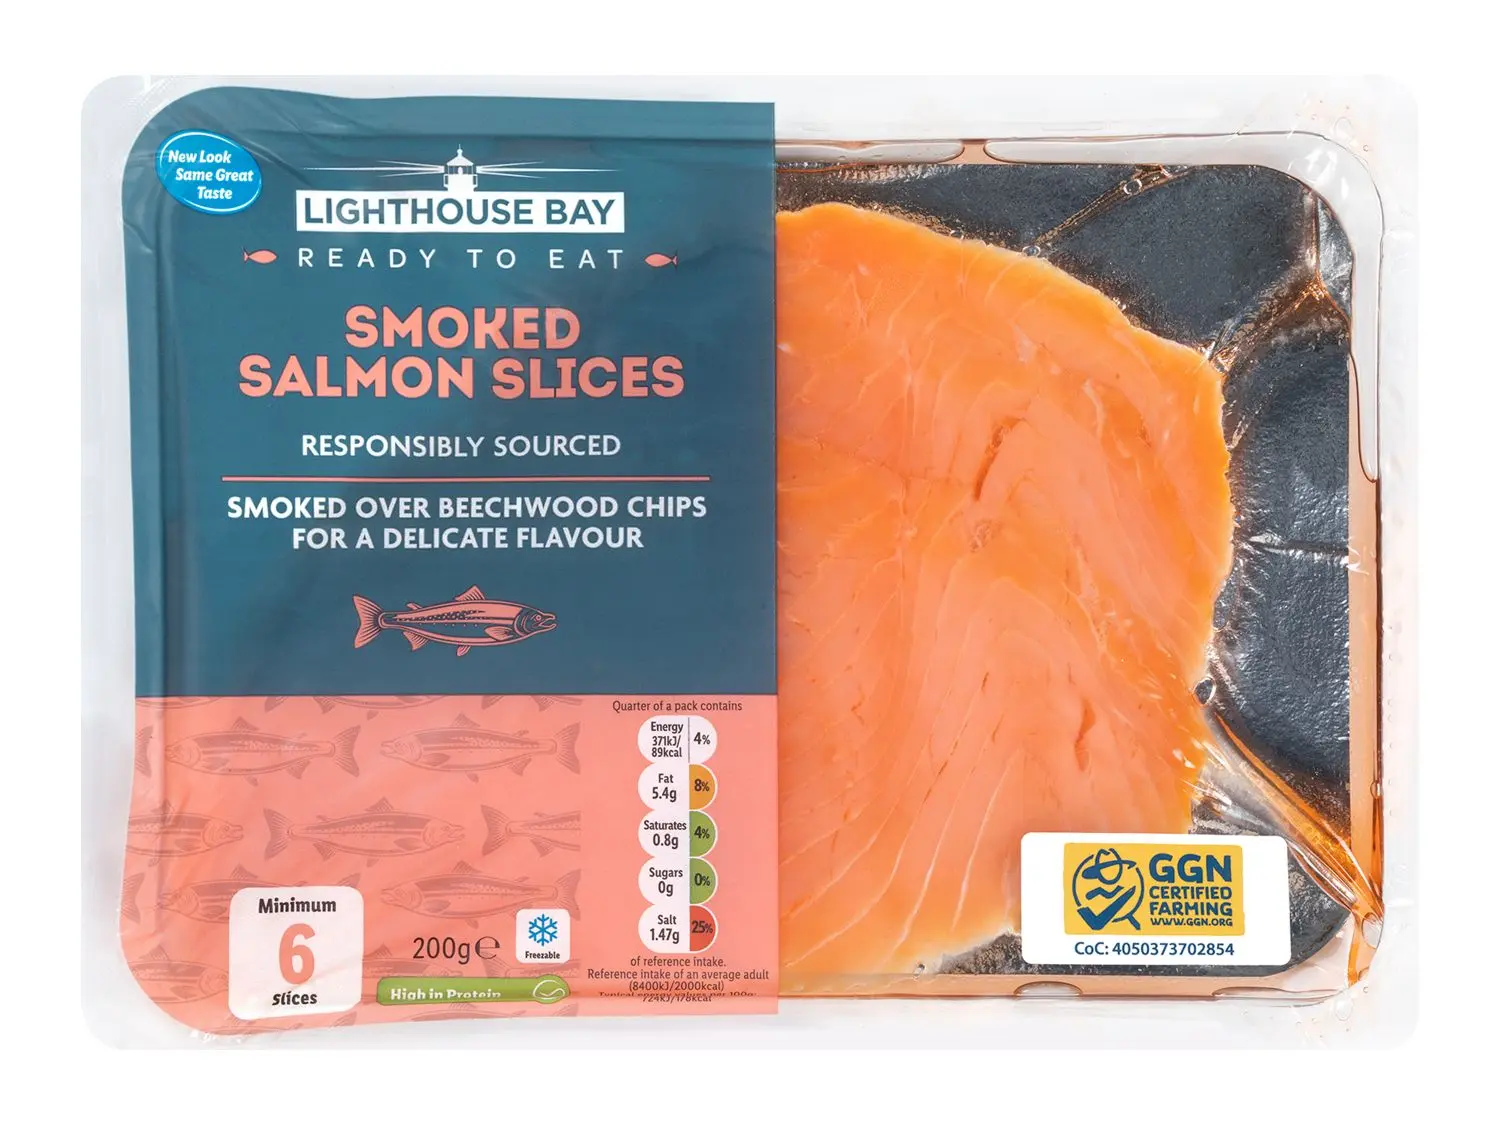 lidl smoked salmon slices - How many calories are in smoked salmon from Lidl